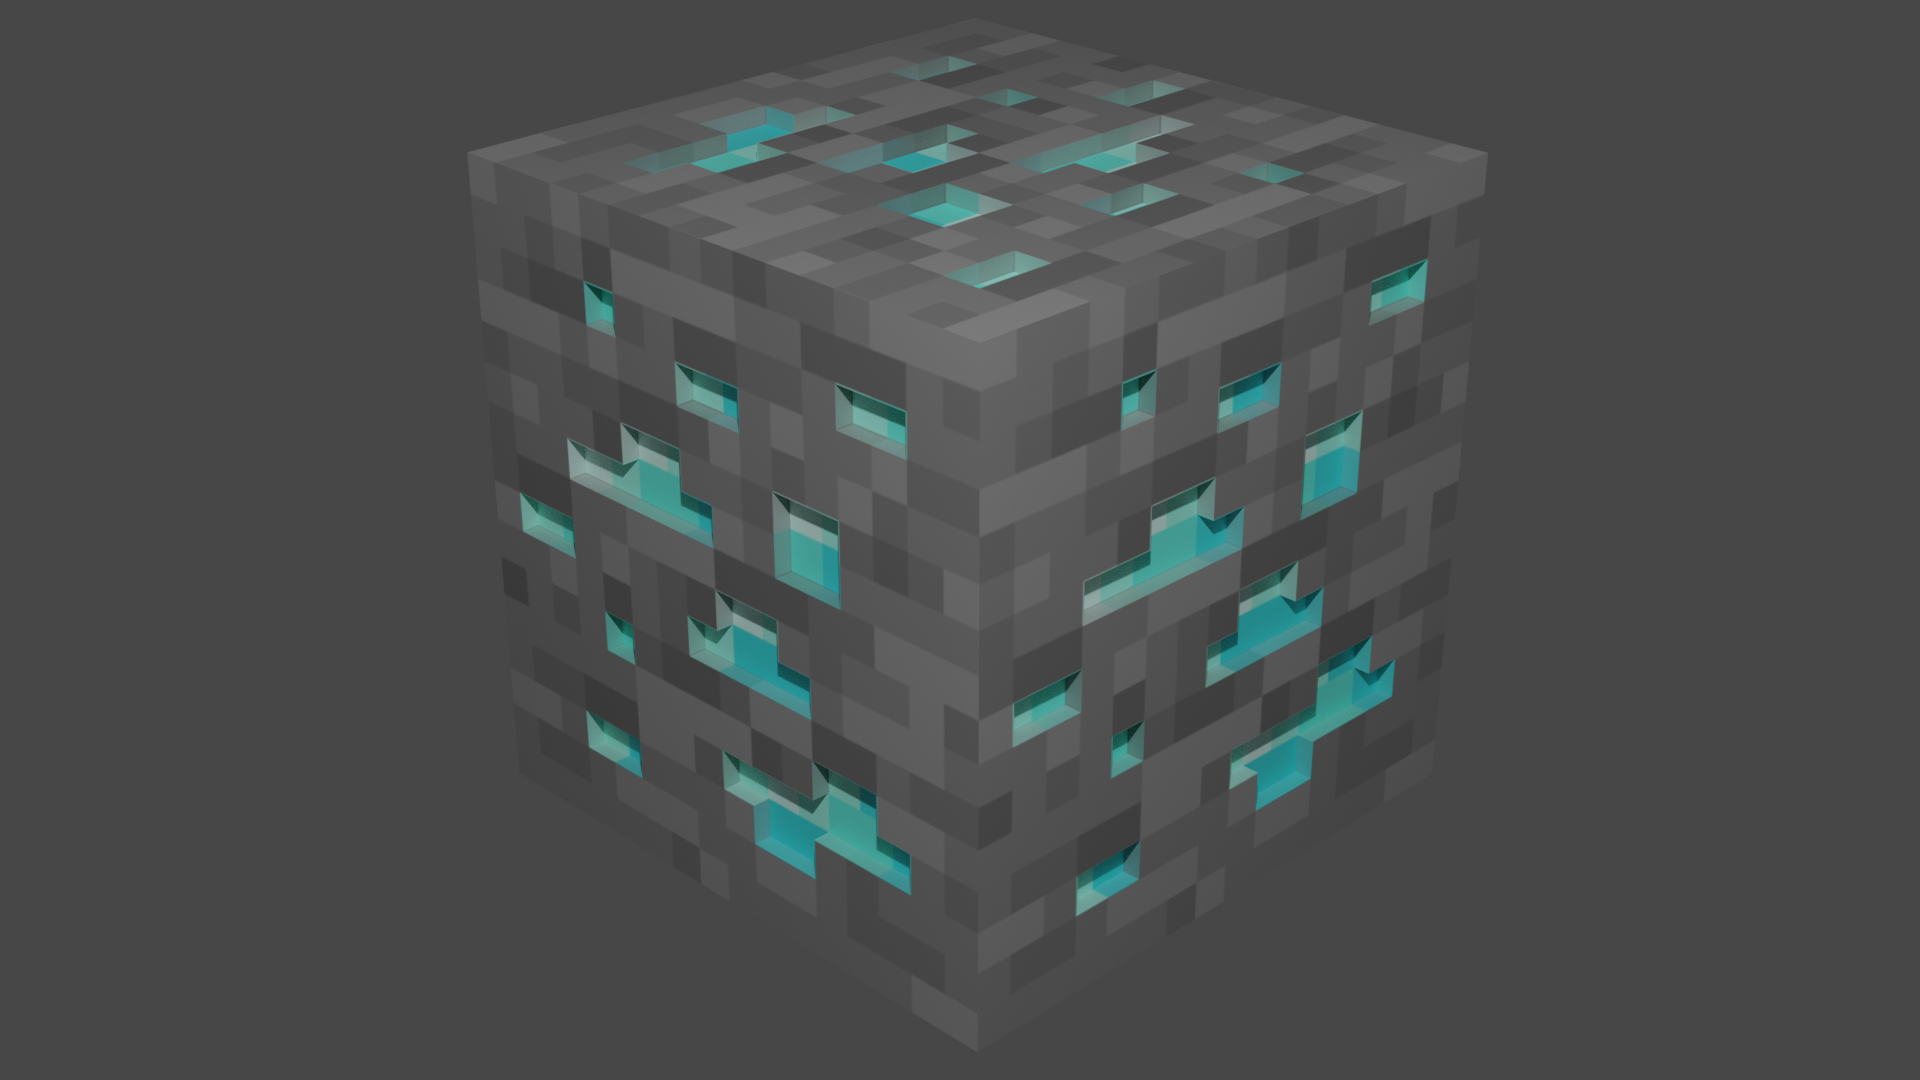 I made the Diamond Ore look more satisfying to look